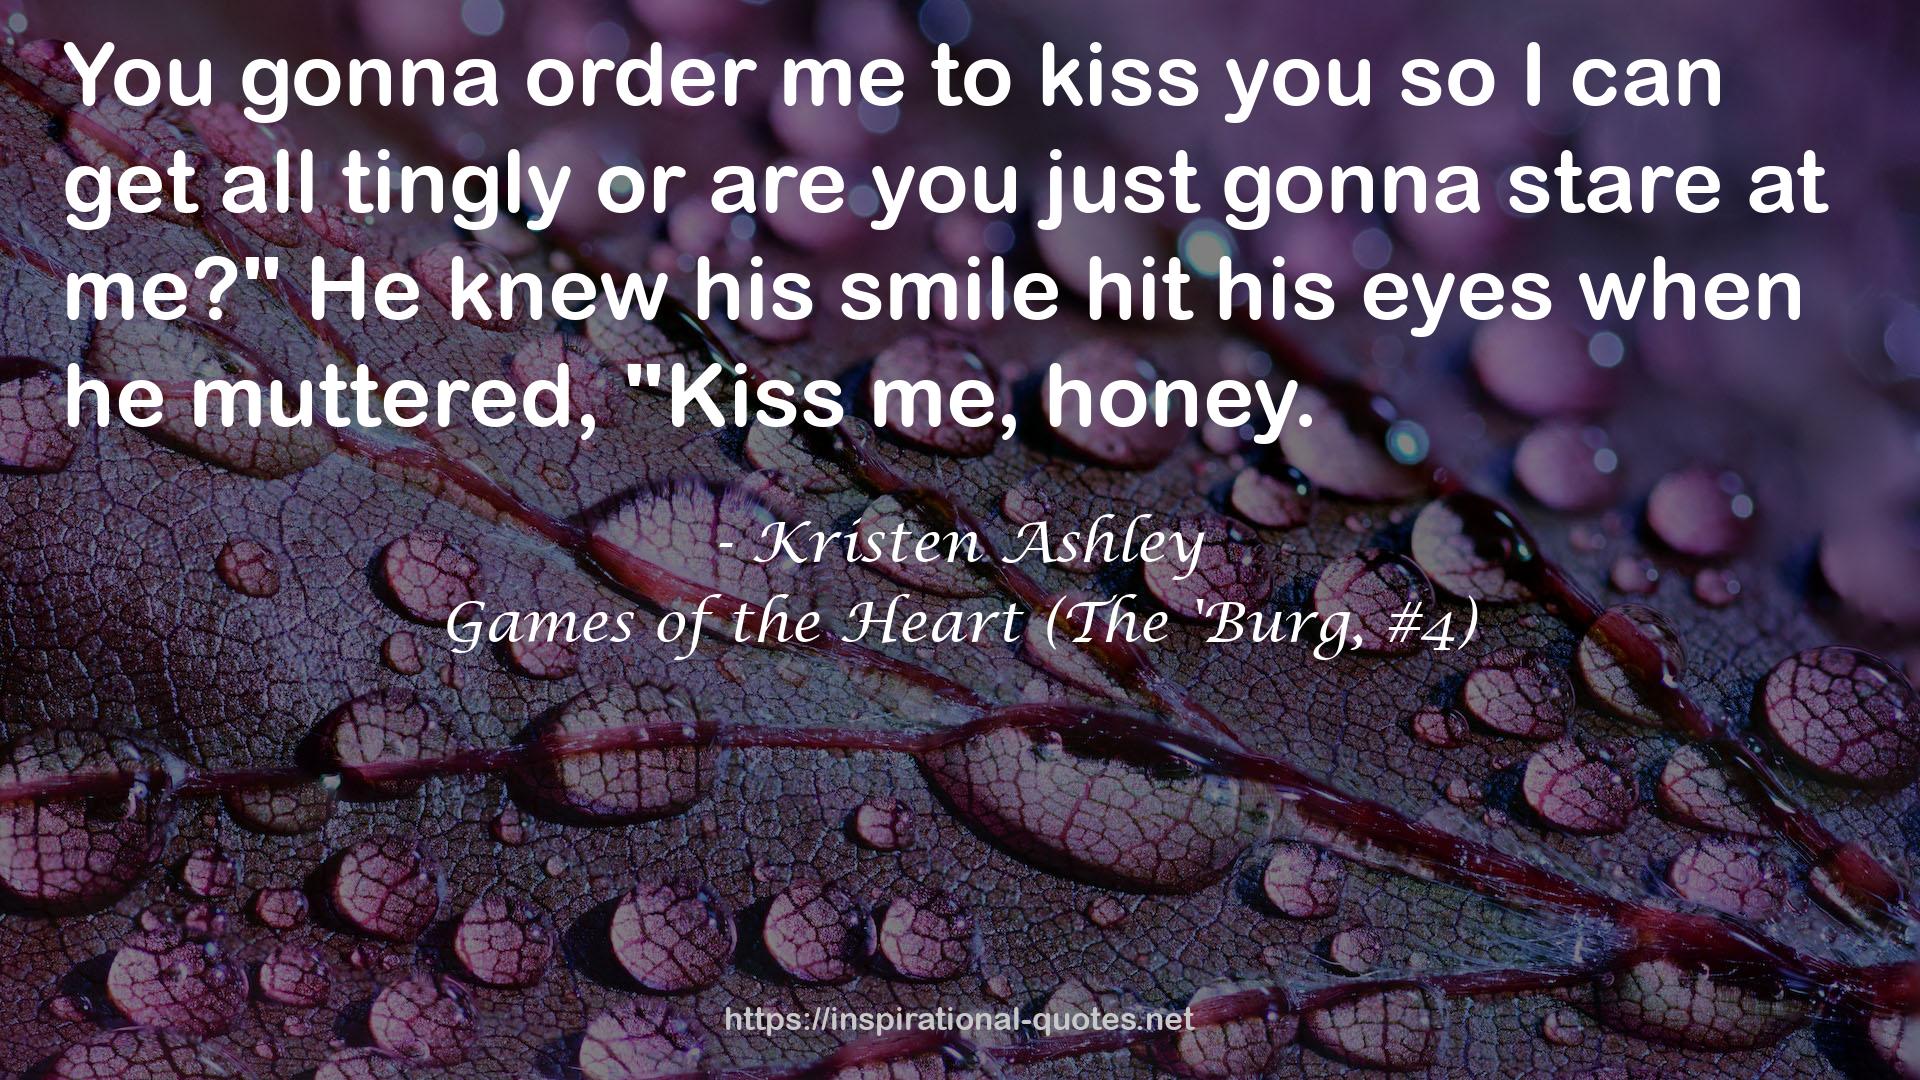 Games of the Heart (The 'Burg, #4) QUOTES